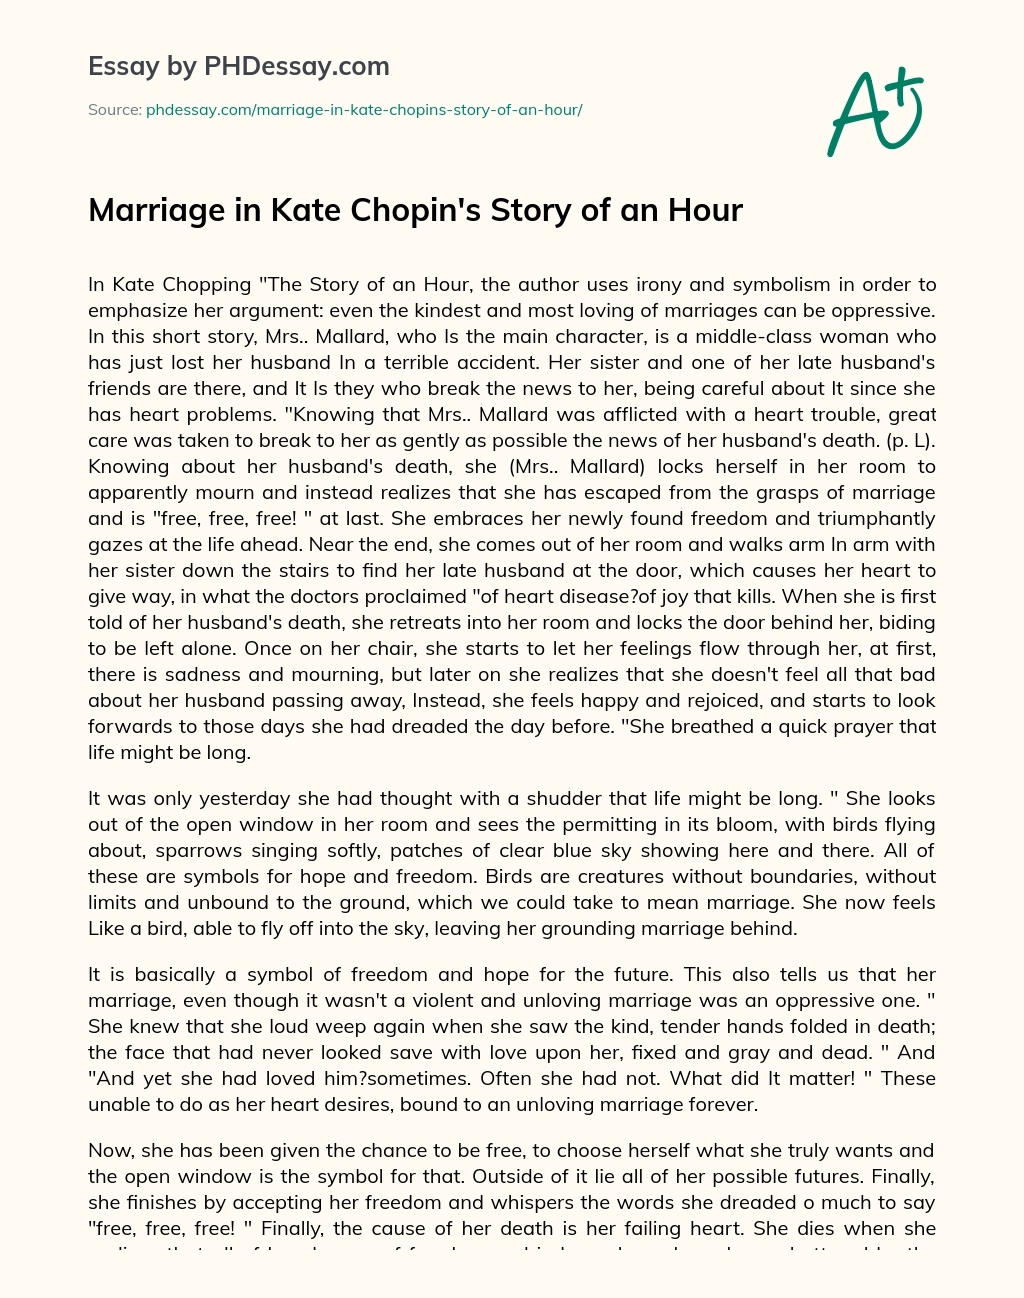 Marriage in Kate Chopin’s Story of an Hour essay